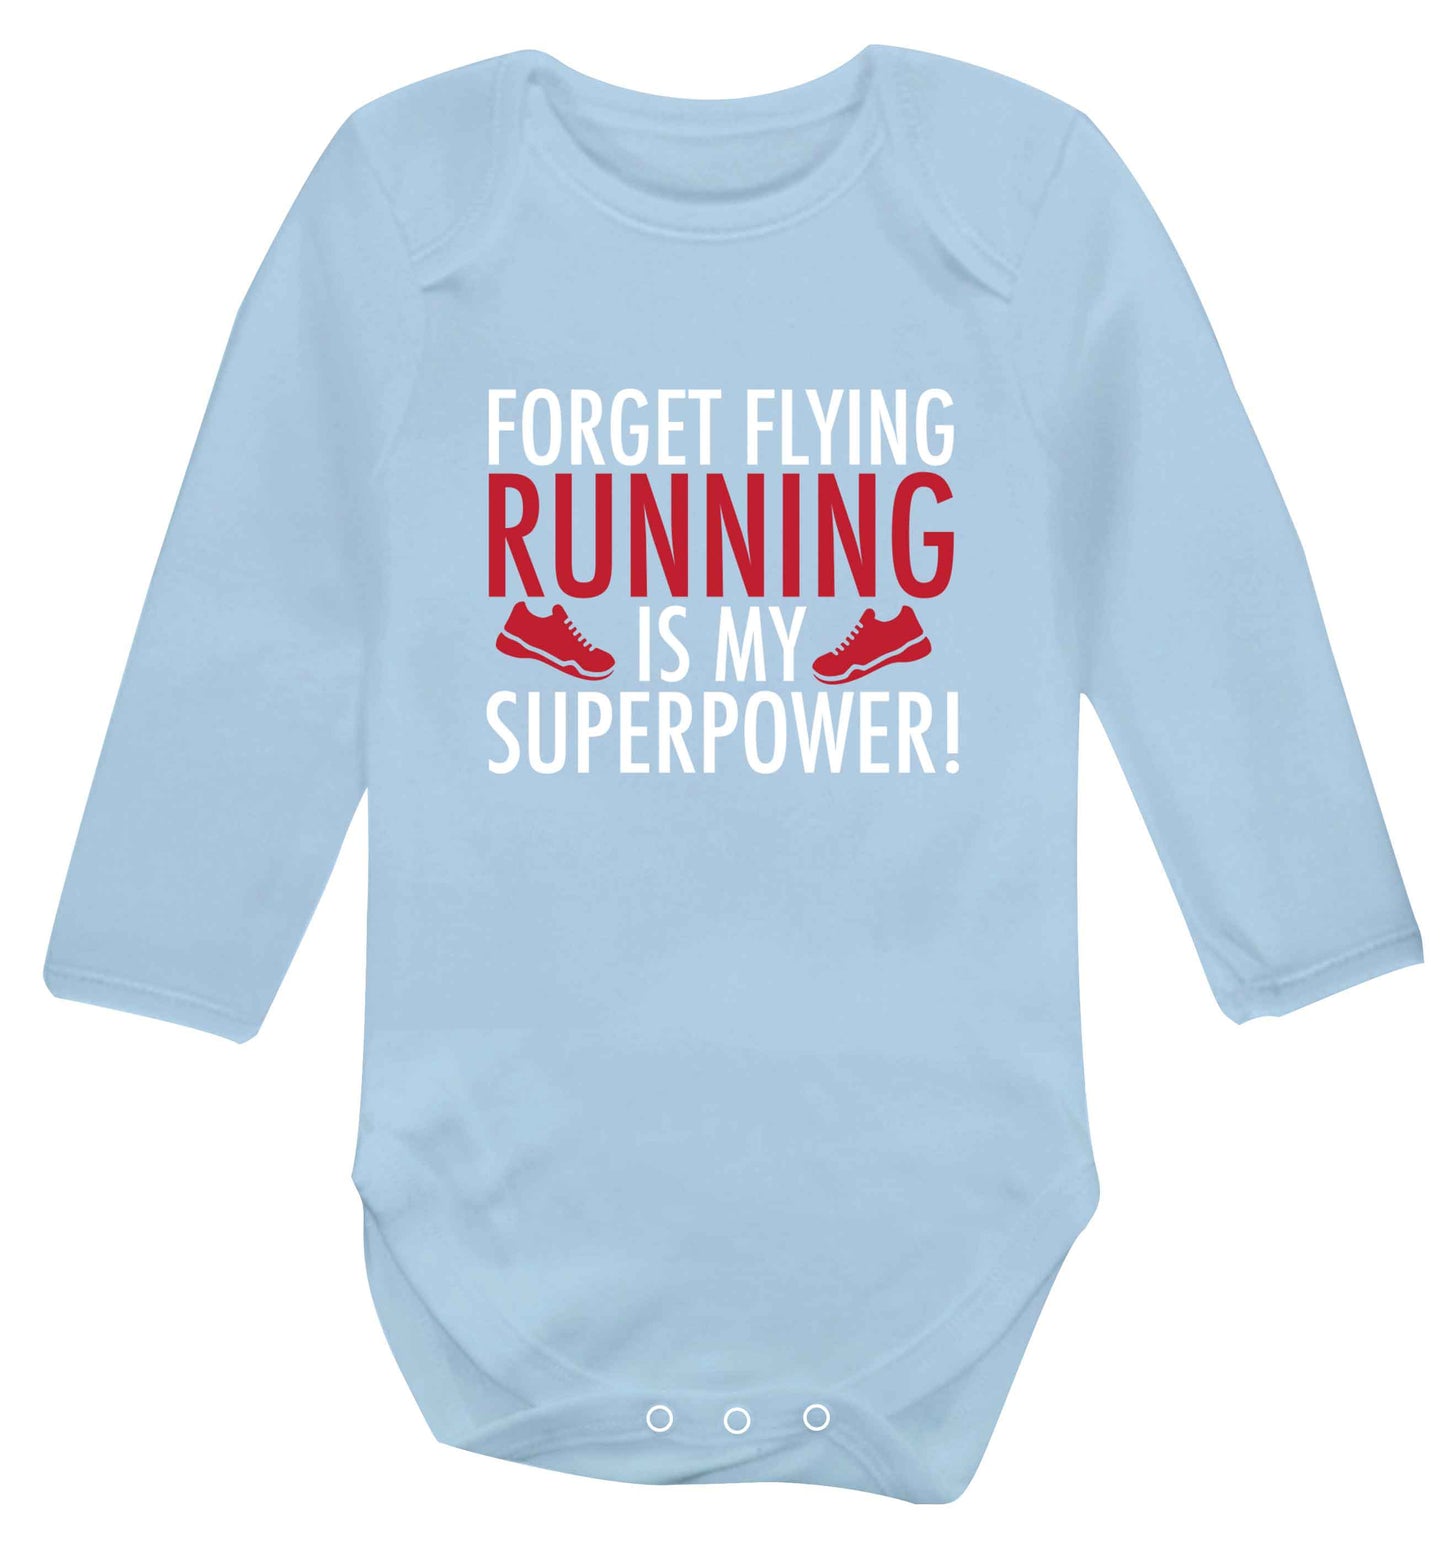 Crazy running dude baby vest long sleeved pale blue 6-12 months